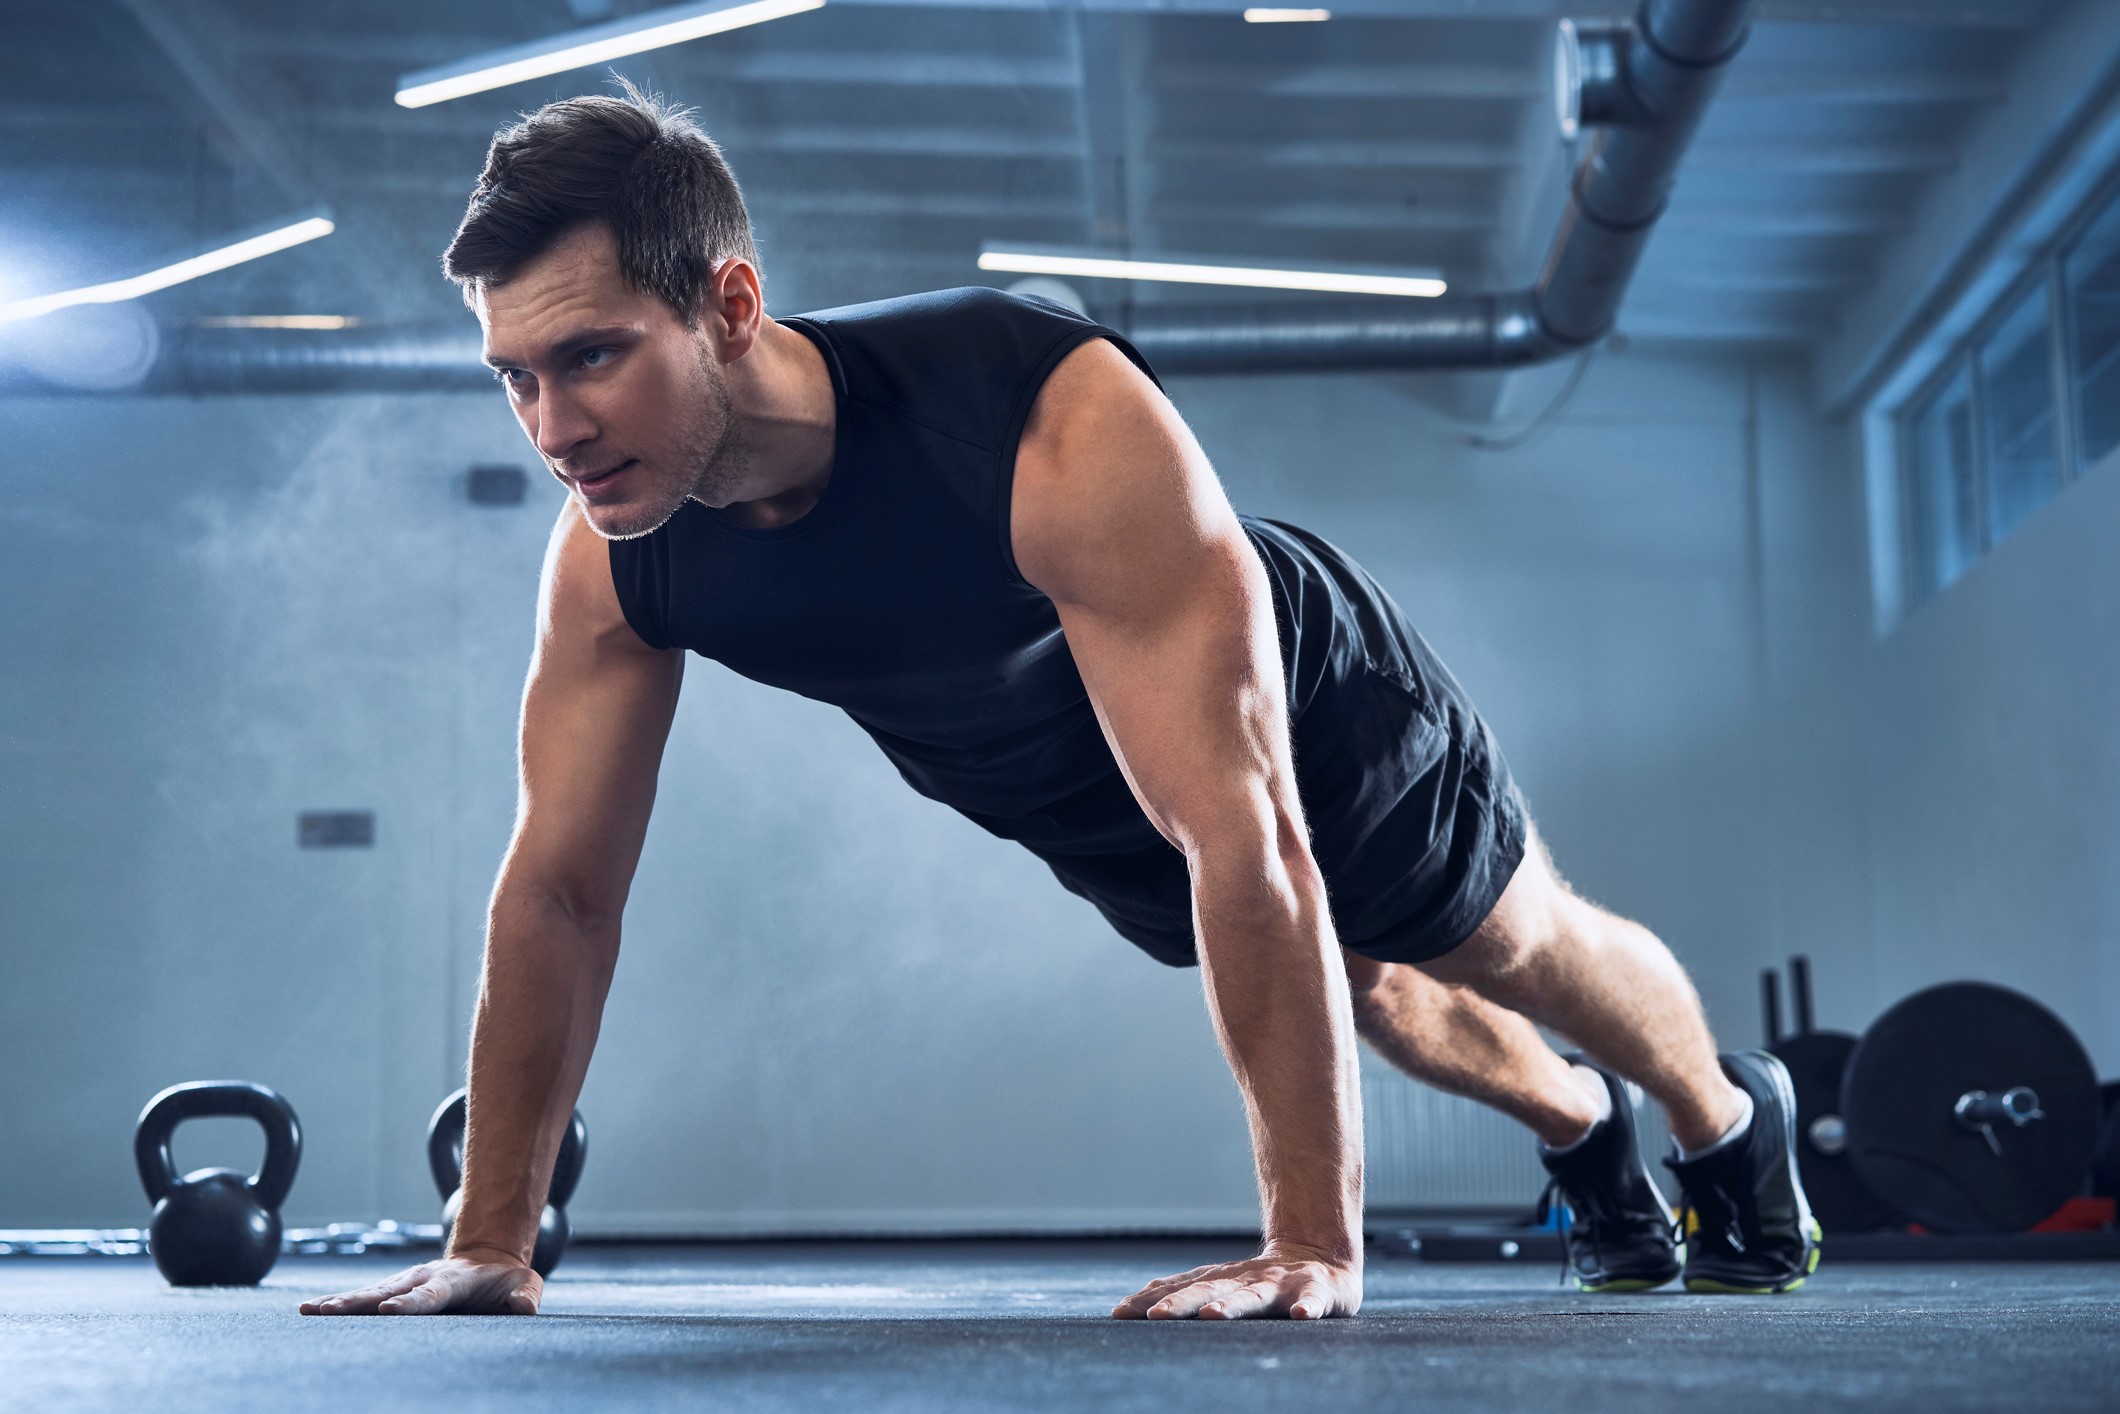 Pushup training tips: Give your upper body strength a boost - The Manual